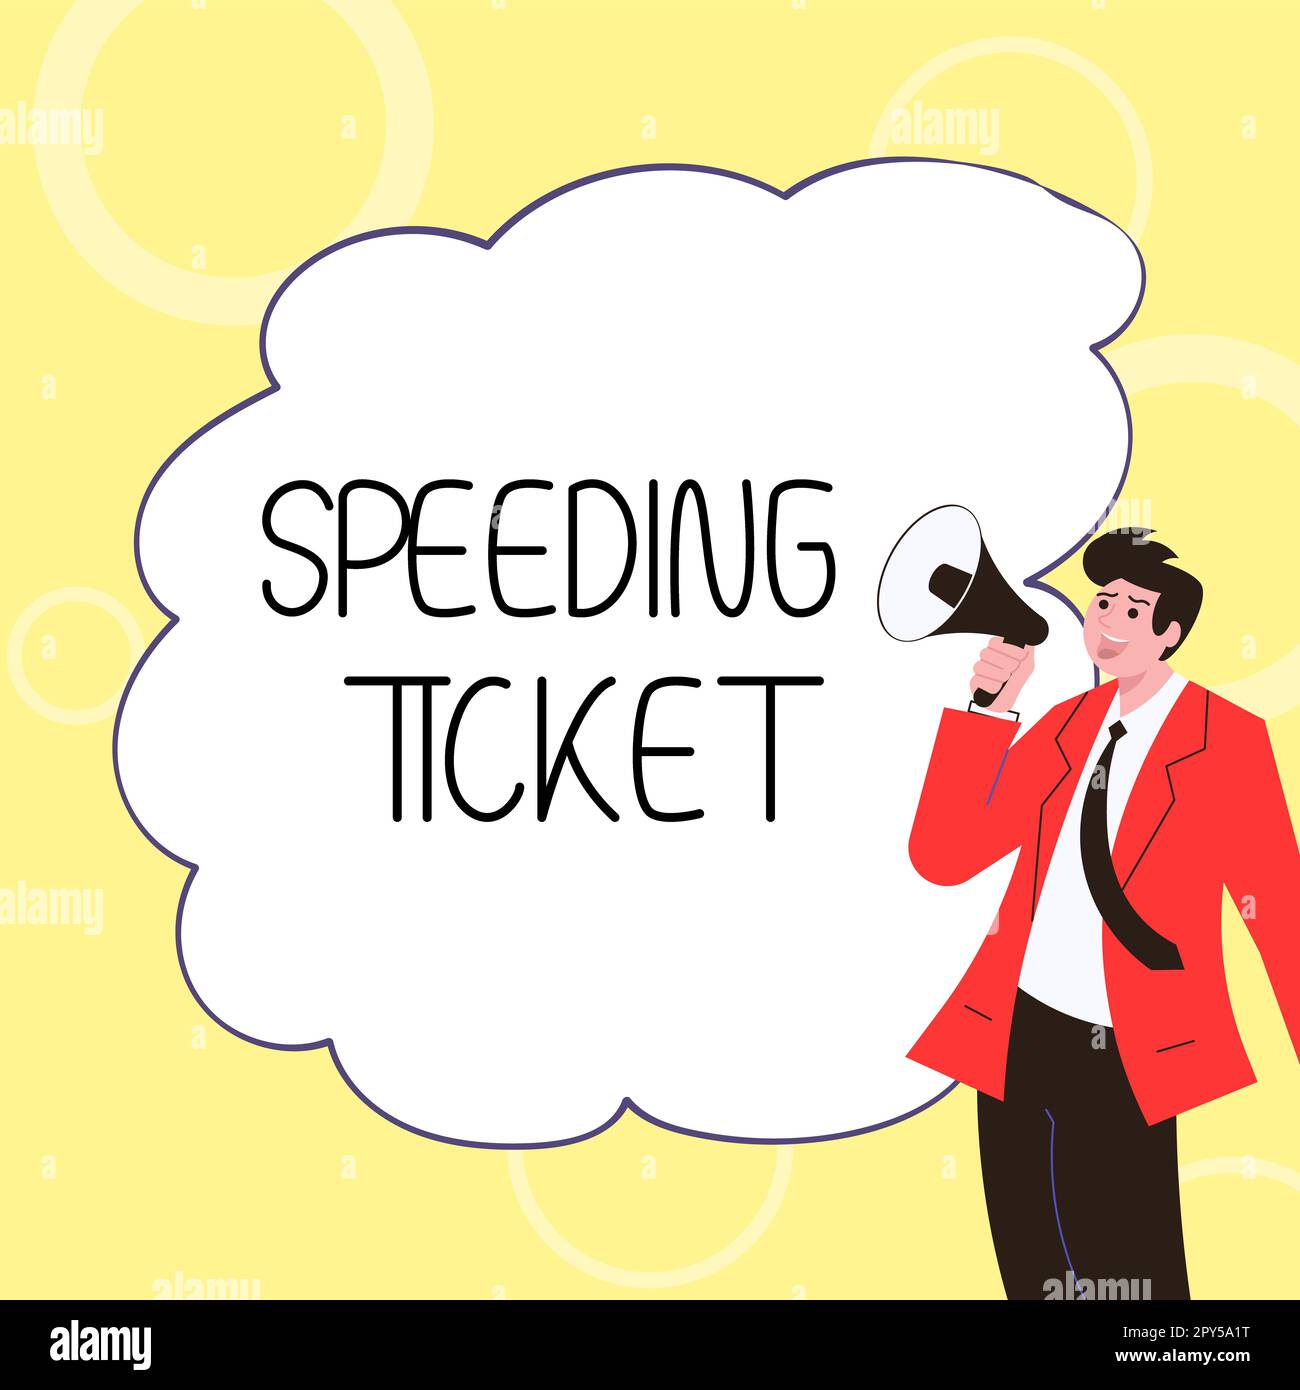 Hand writing sign Speeding Ticket. Internet Concept psychological test for the maximum speed of performing a task Stock Photo